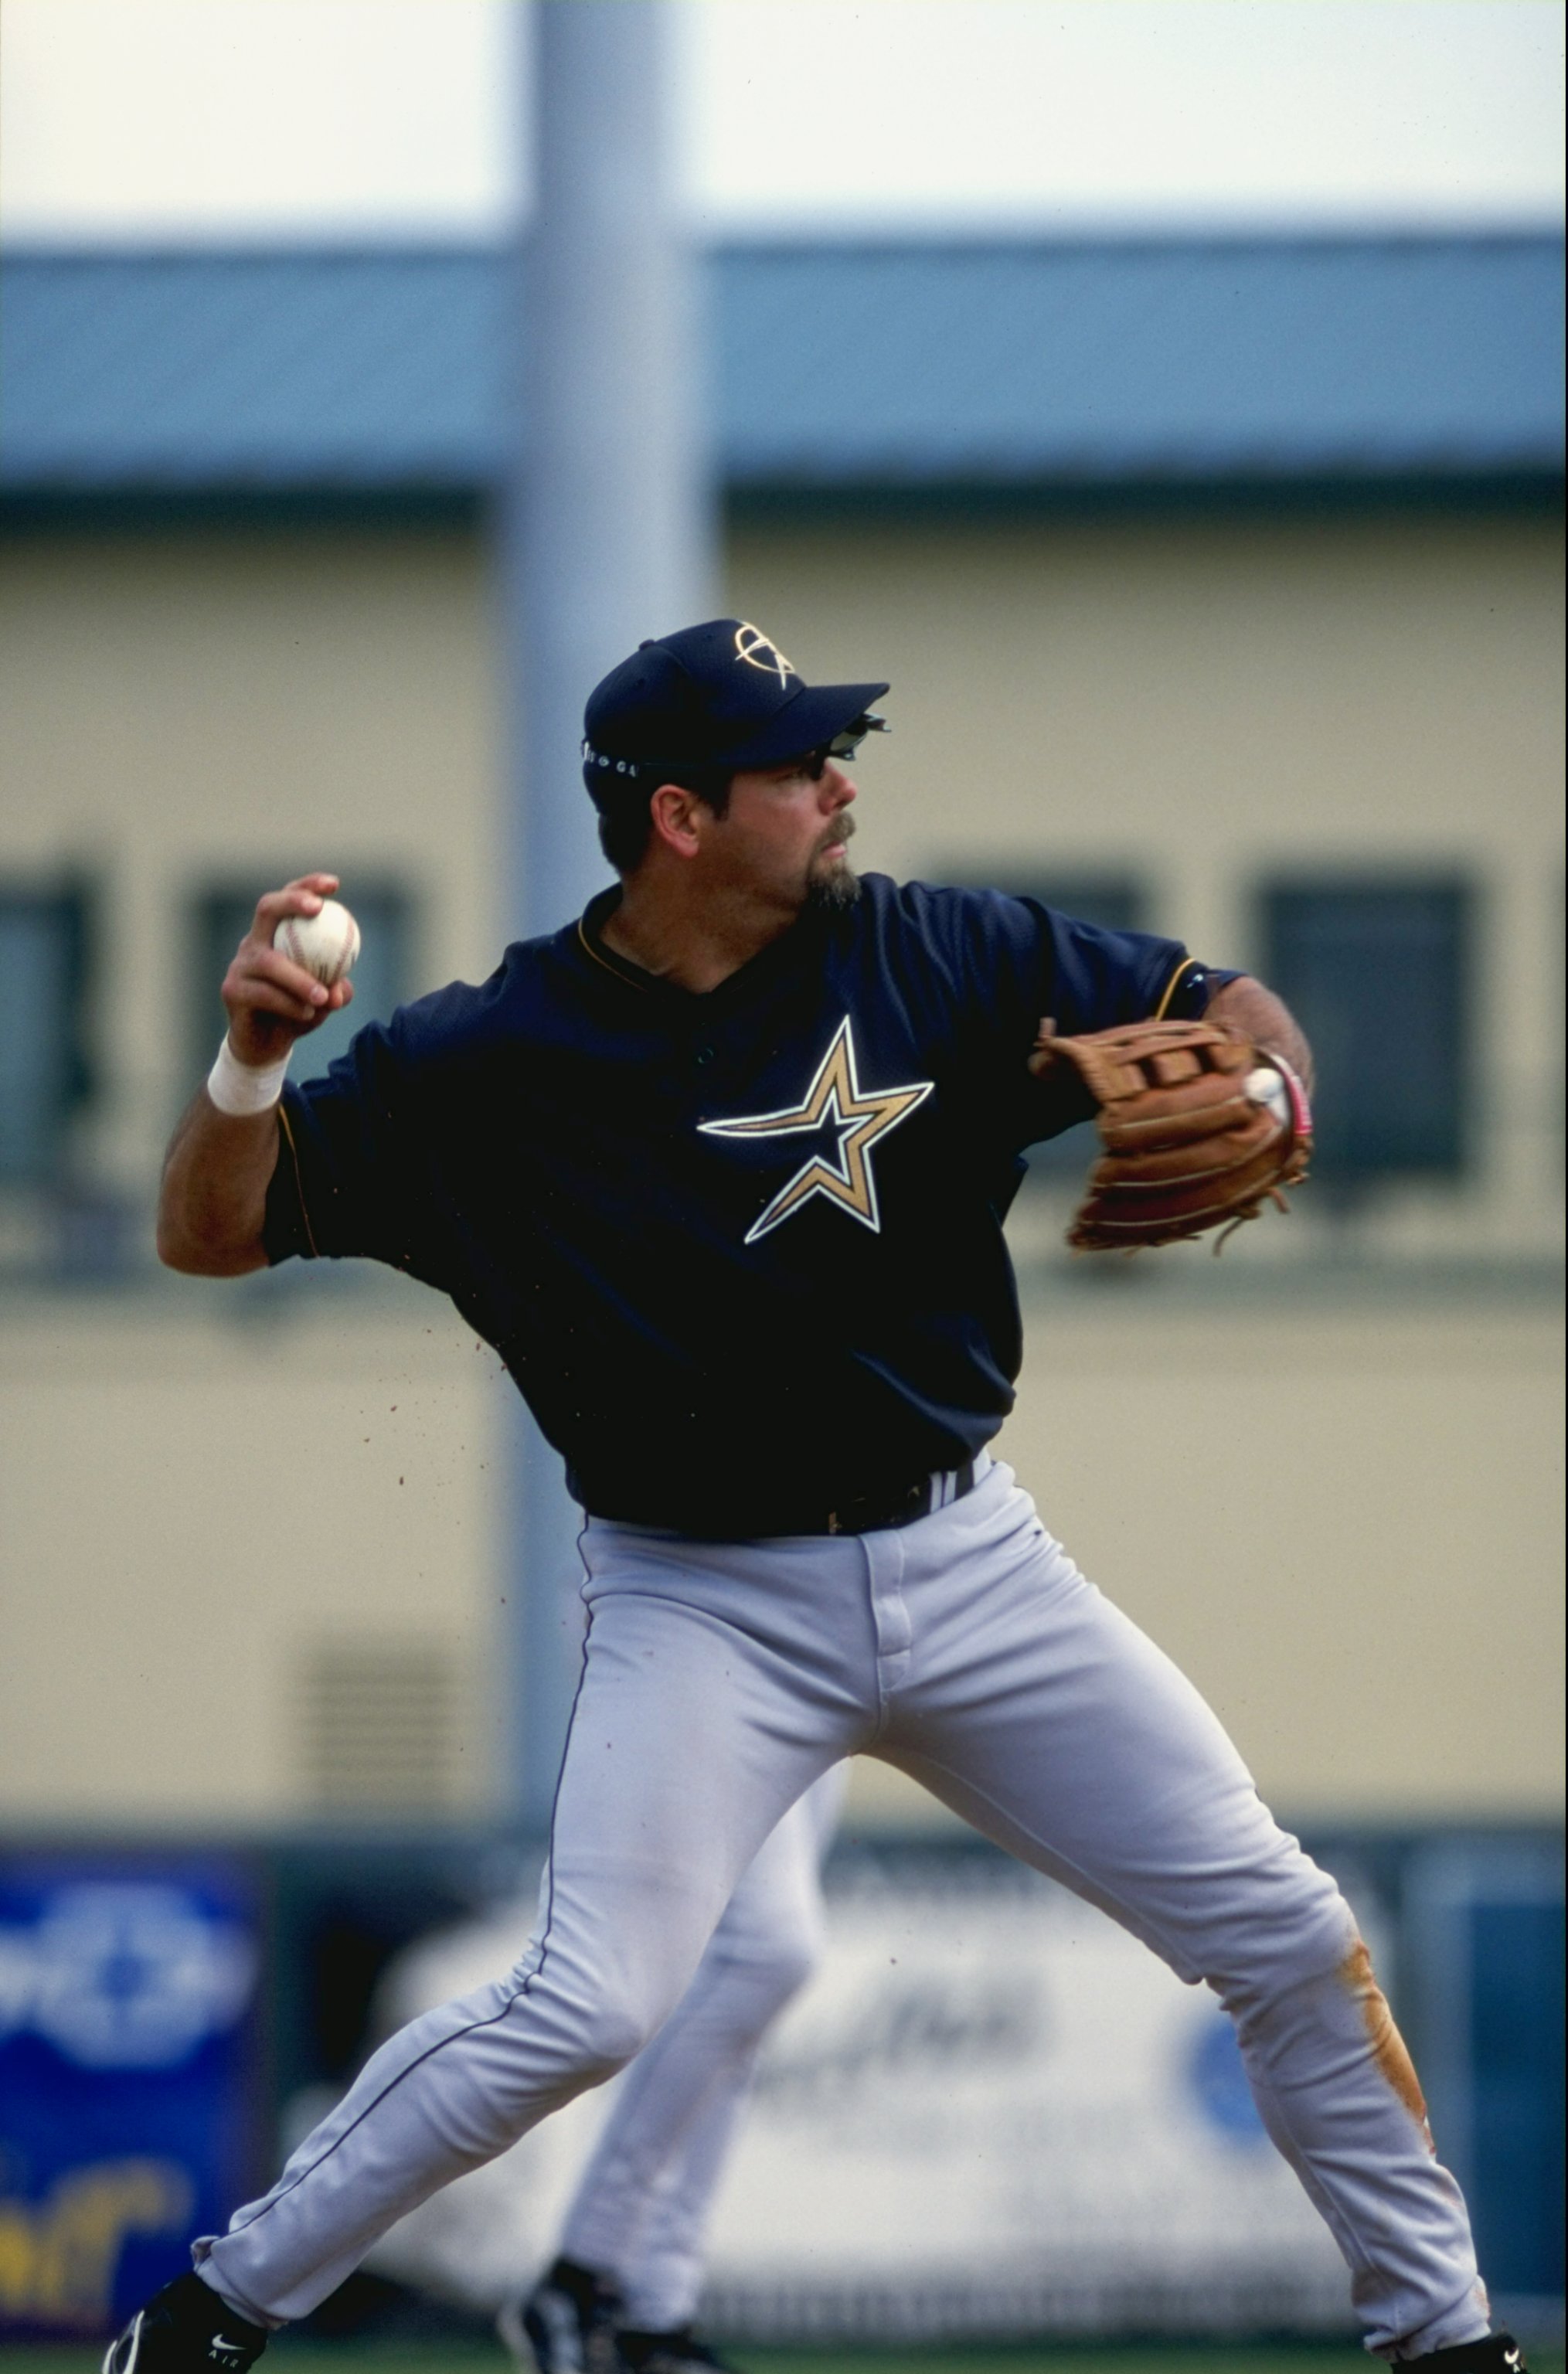 His demons plagued Ken Caminiti to the end, News